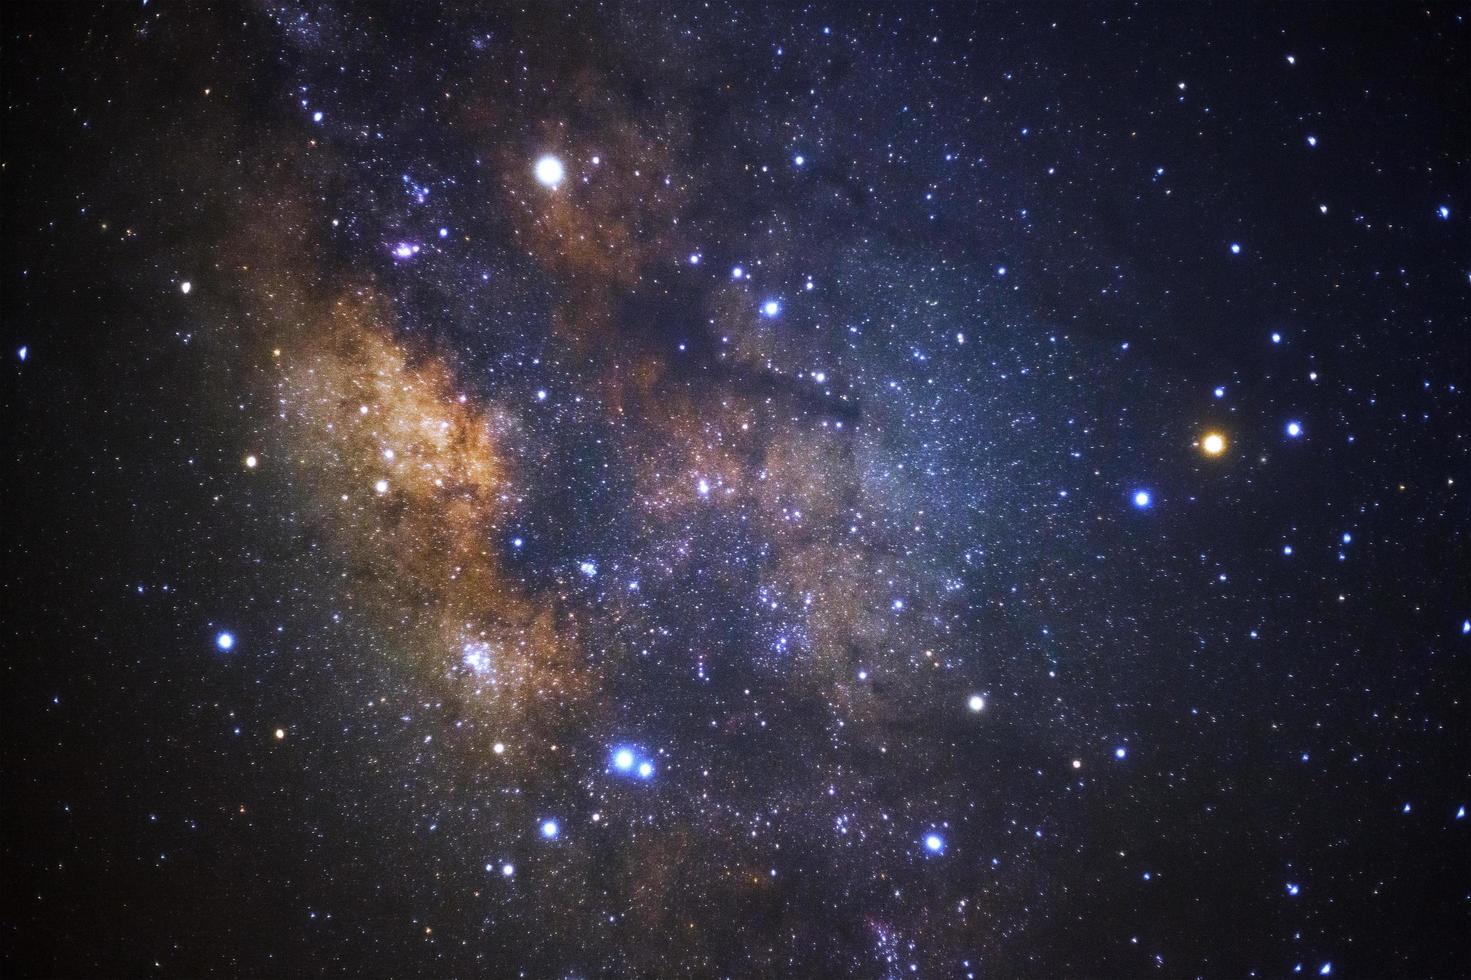 milky way galaxy with stars and space dust in the universe photo